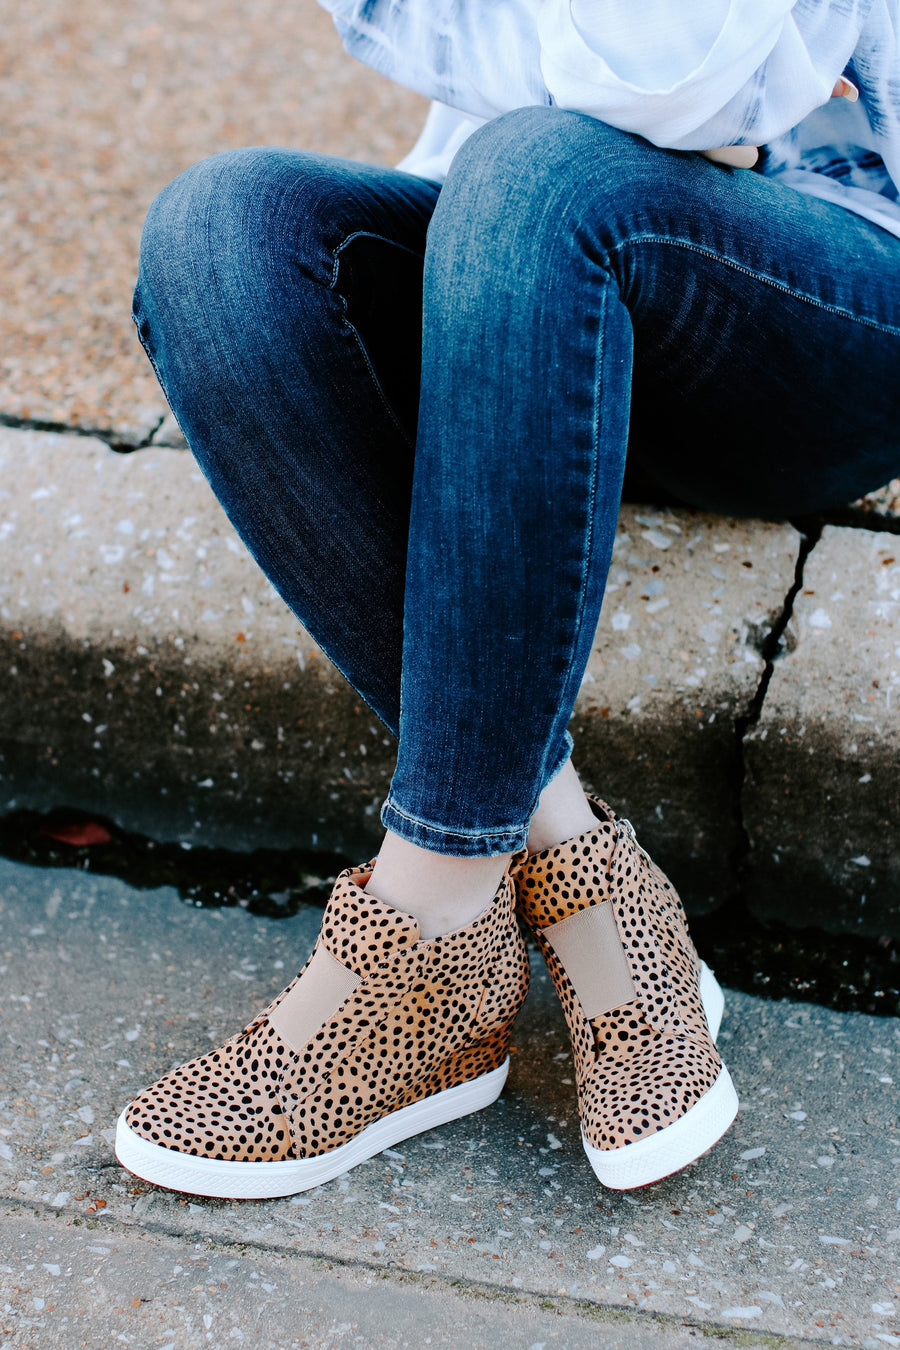 5.5 / Cheetah Front Row Cheetah Print Wedge Sneakers - FINAL SALE - Madison and Mallory